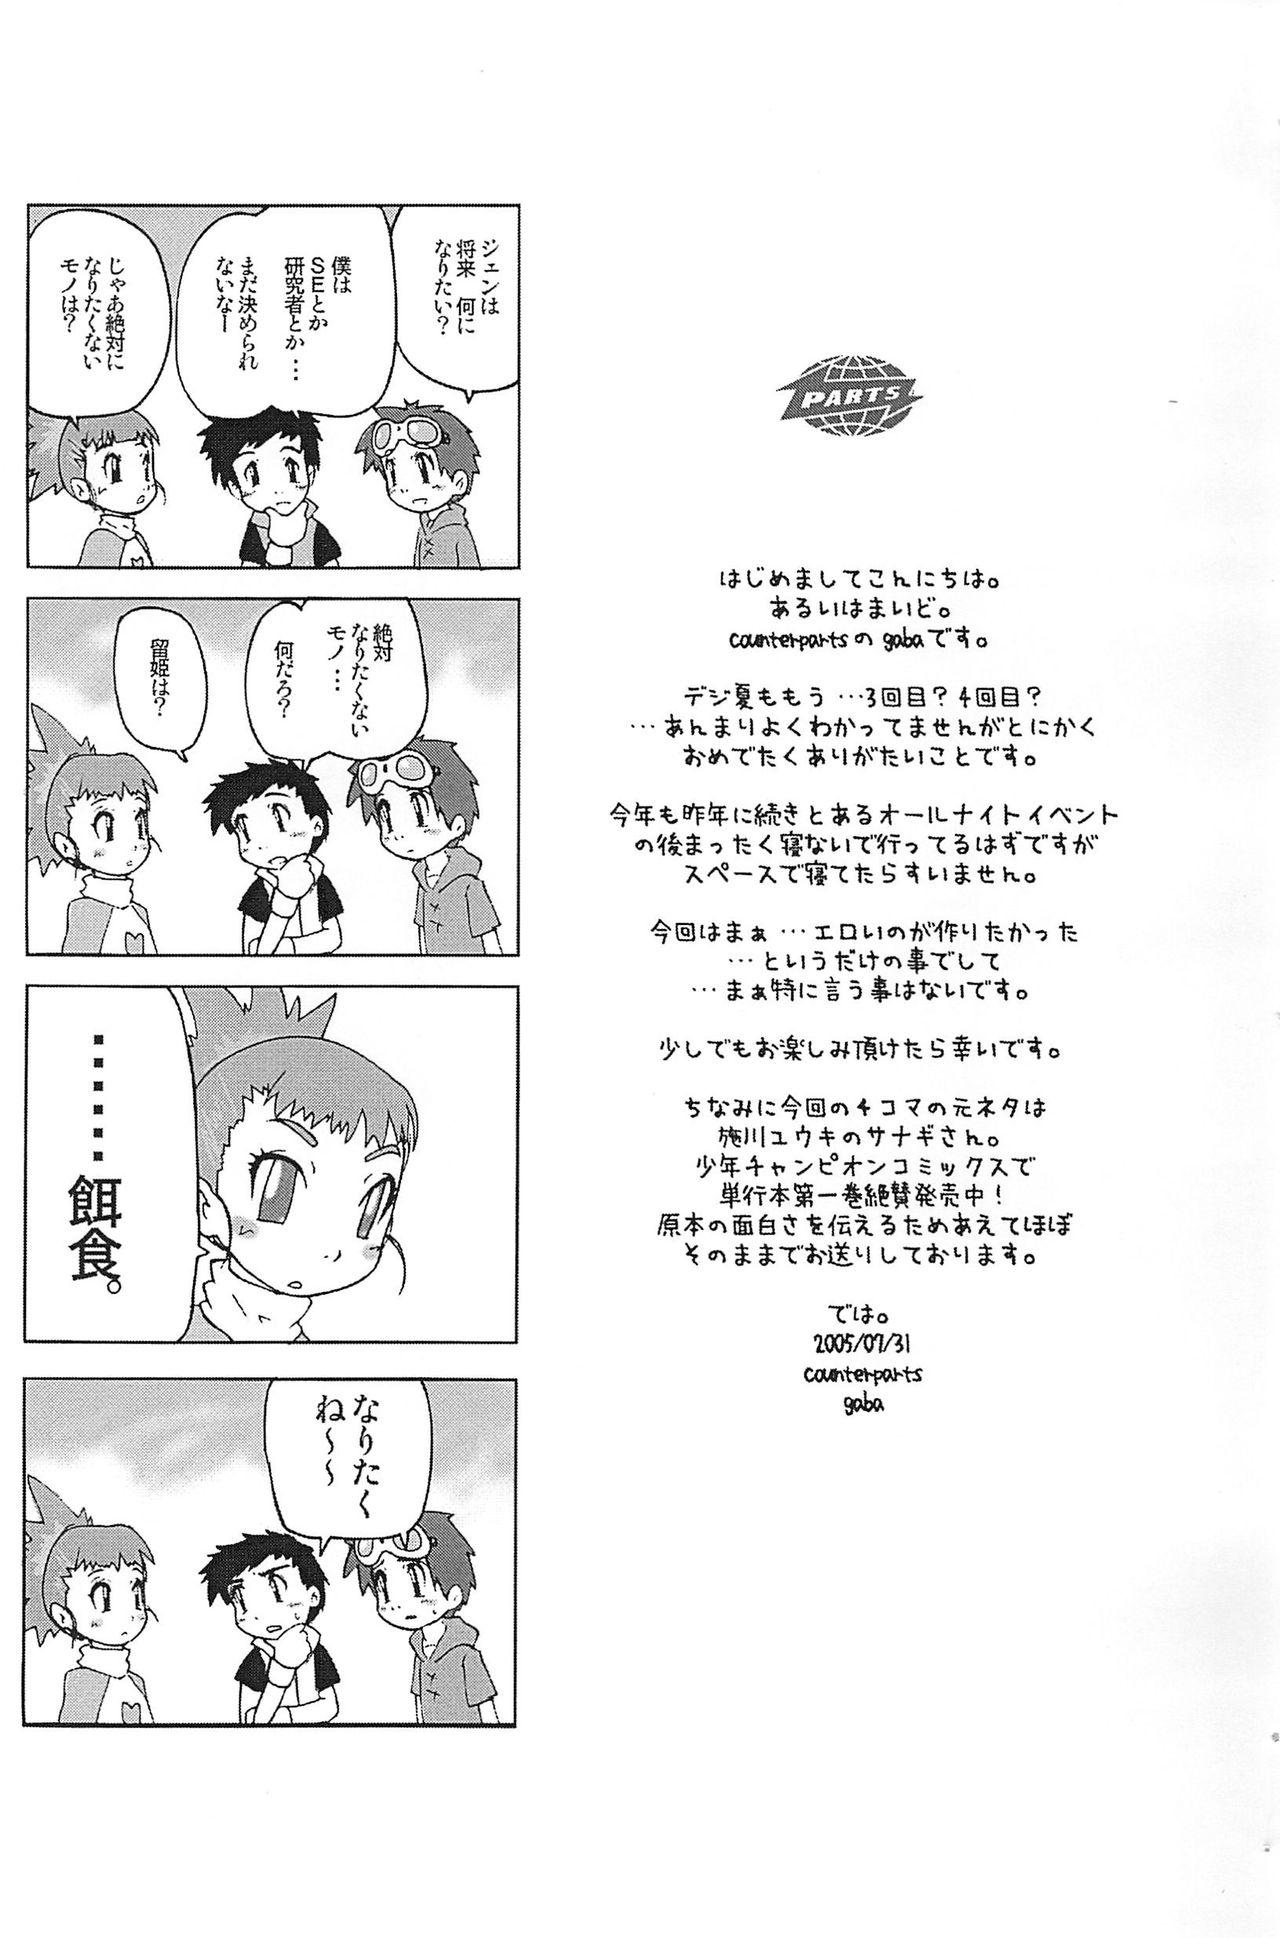 Boy Silent roar - Digimon tamers White Chick - Page 3